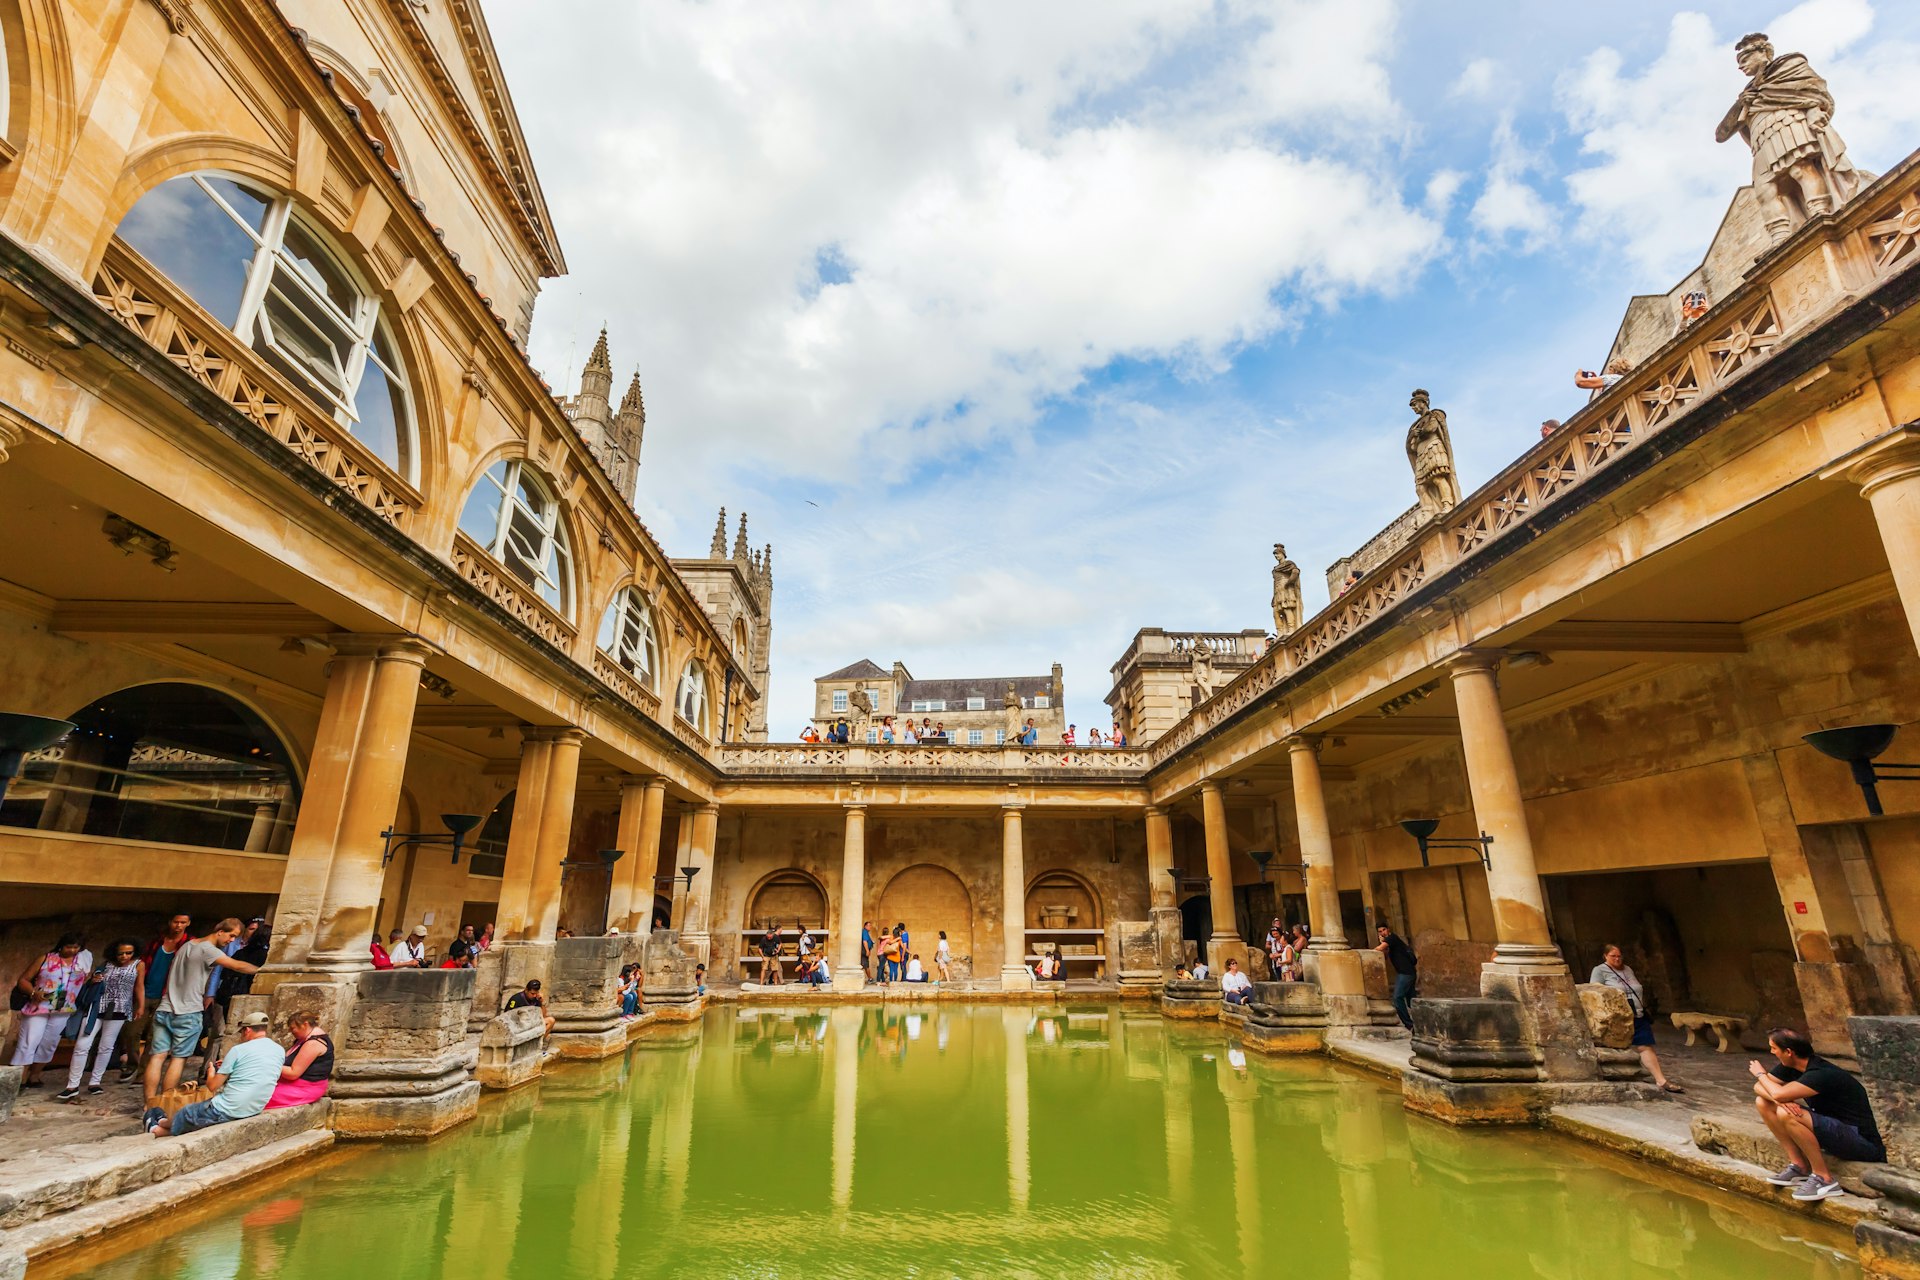 The Roman Baths gave the town of Bath its name